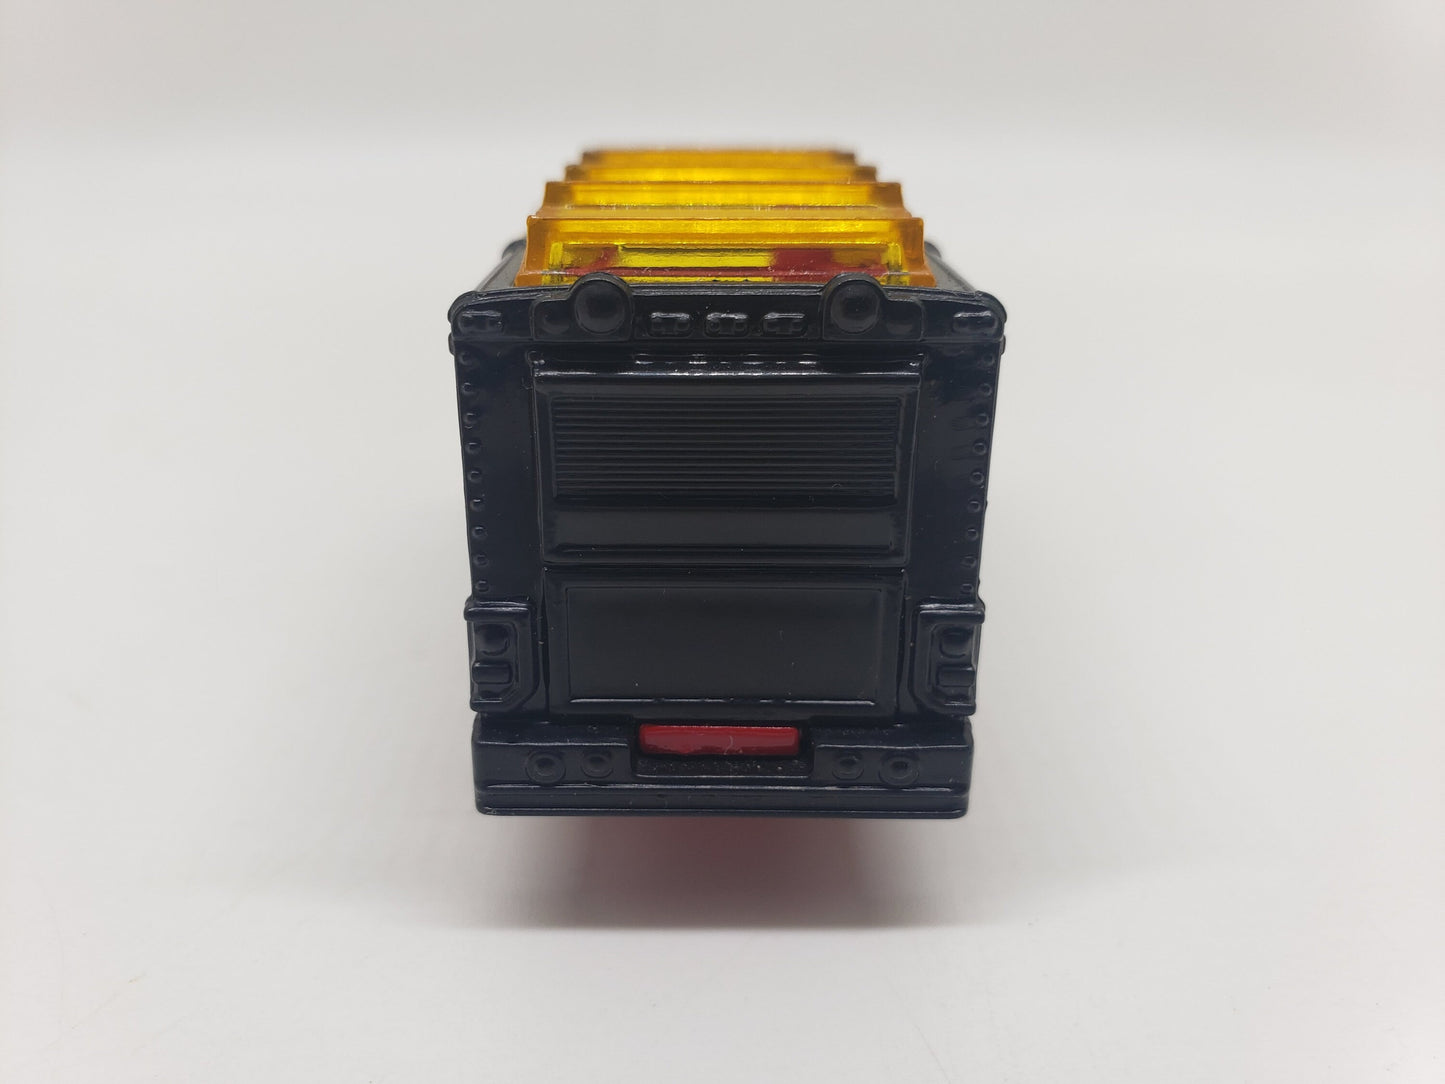 Matchbox Food Truck The Lobster Cage Black MBX City Perfect Birthday Gift Miniature Collectable Model Toy Car Chow Wagon Chow Mobile